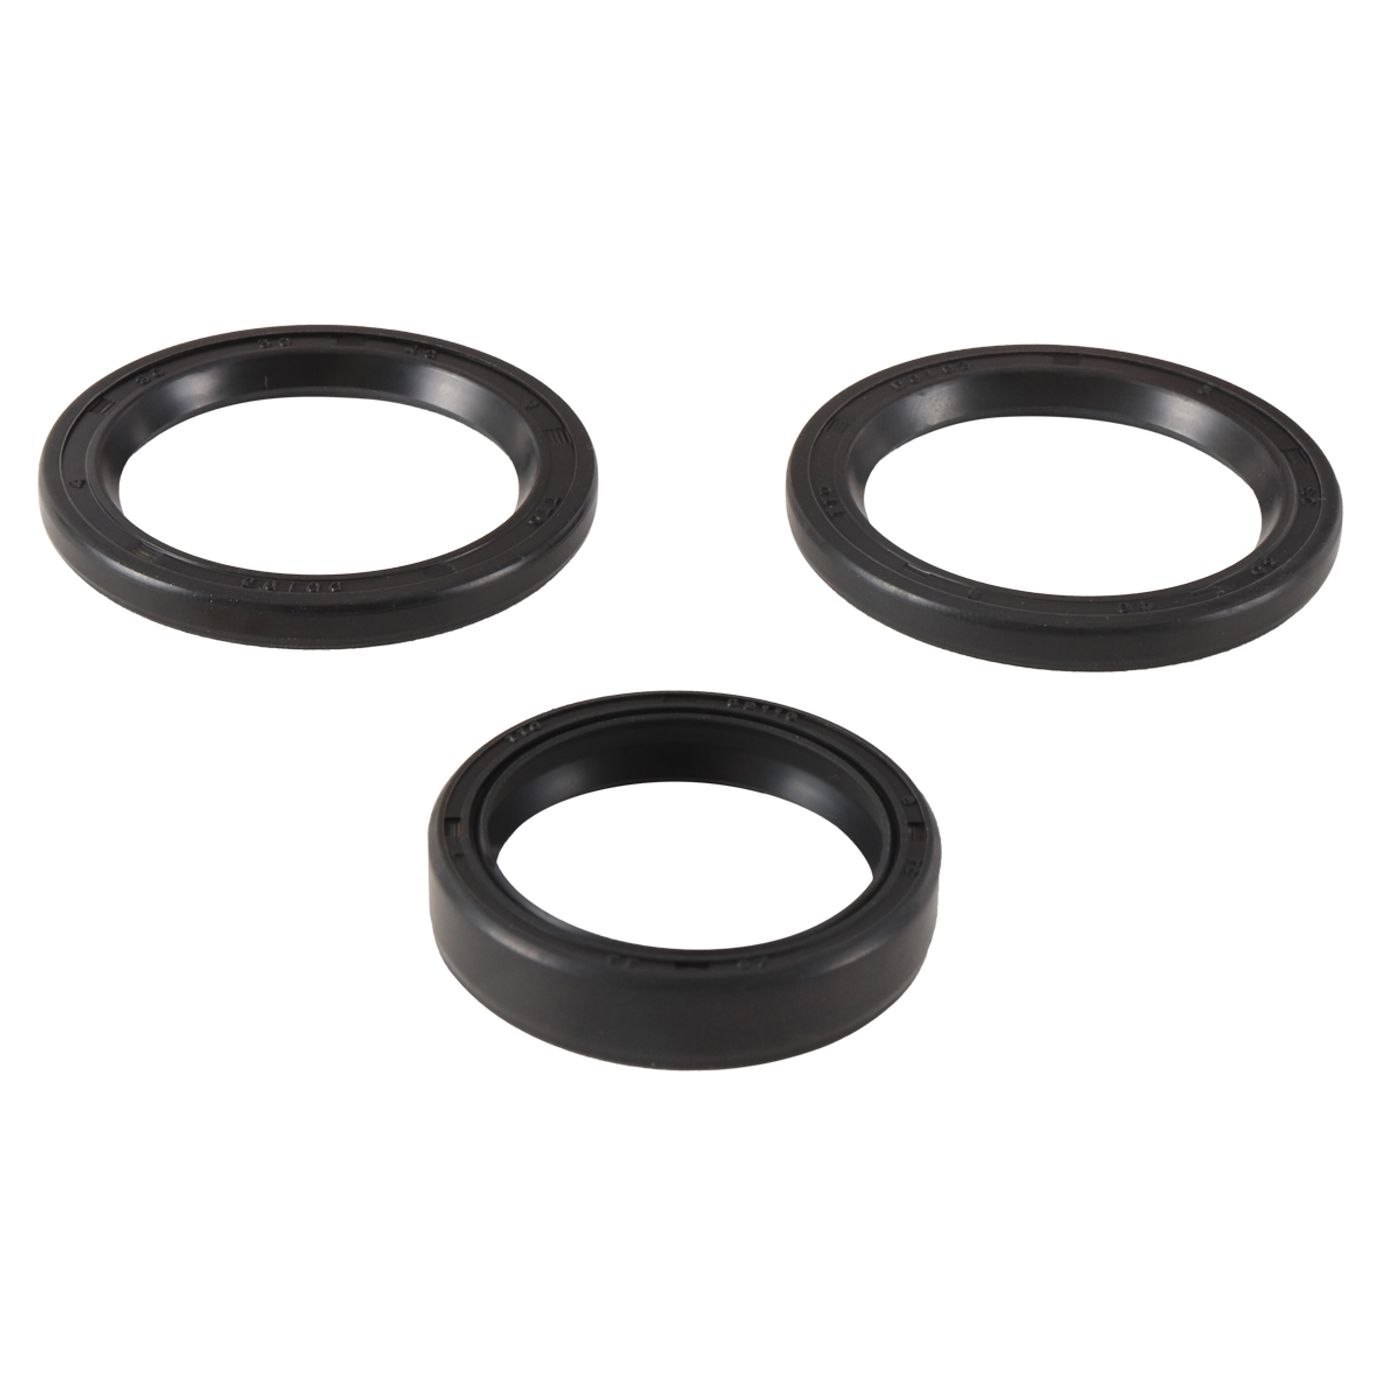 Wrp Diff Seal Kits - WRP252076-5 image